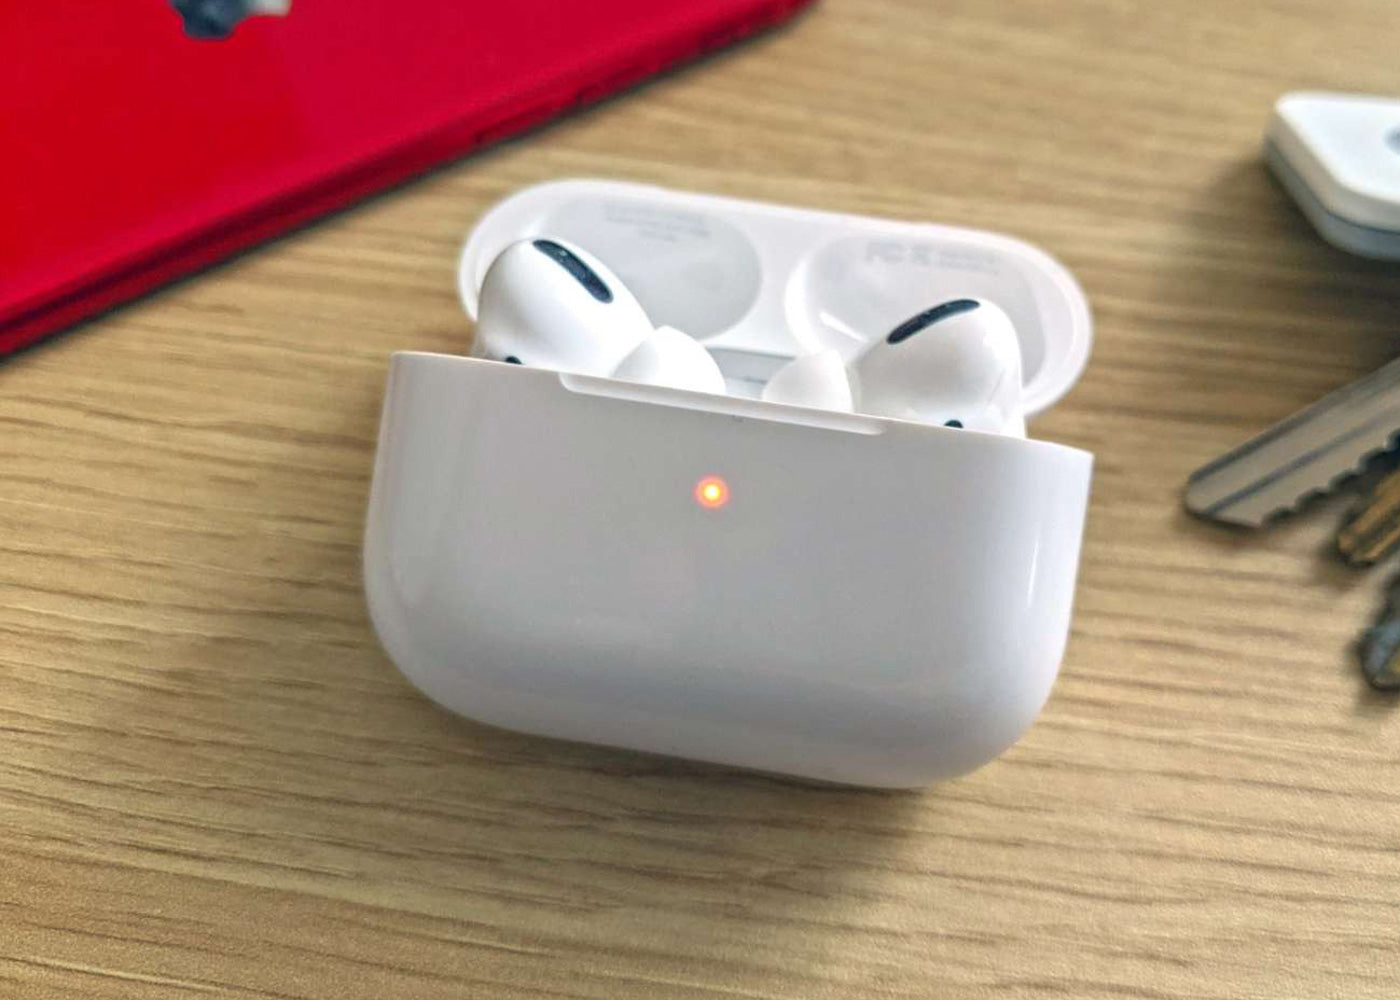 What do the LED colors mean on Airpods?